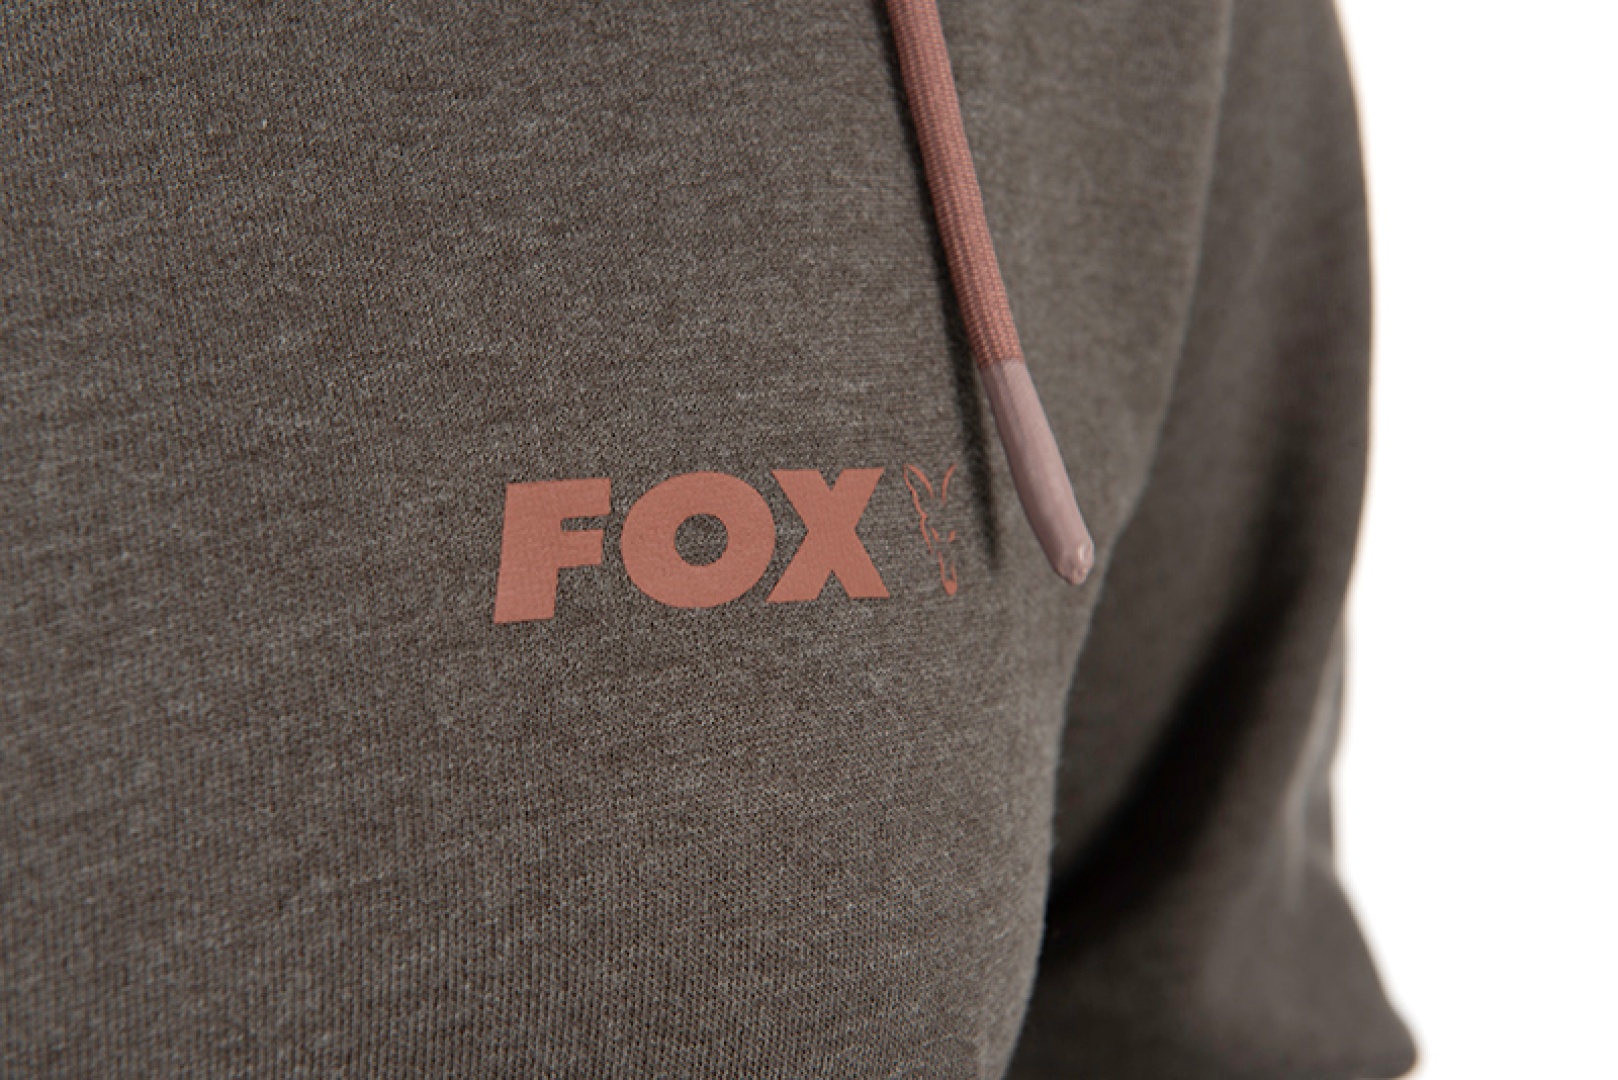 Fox Woman Clothes - Zipped Hoodie